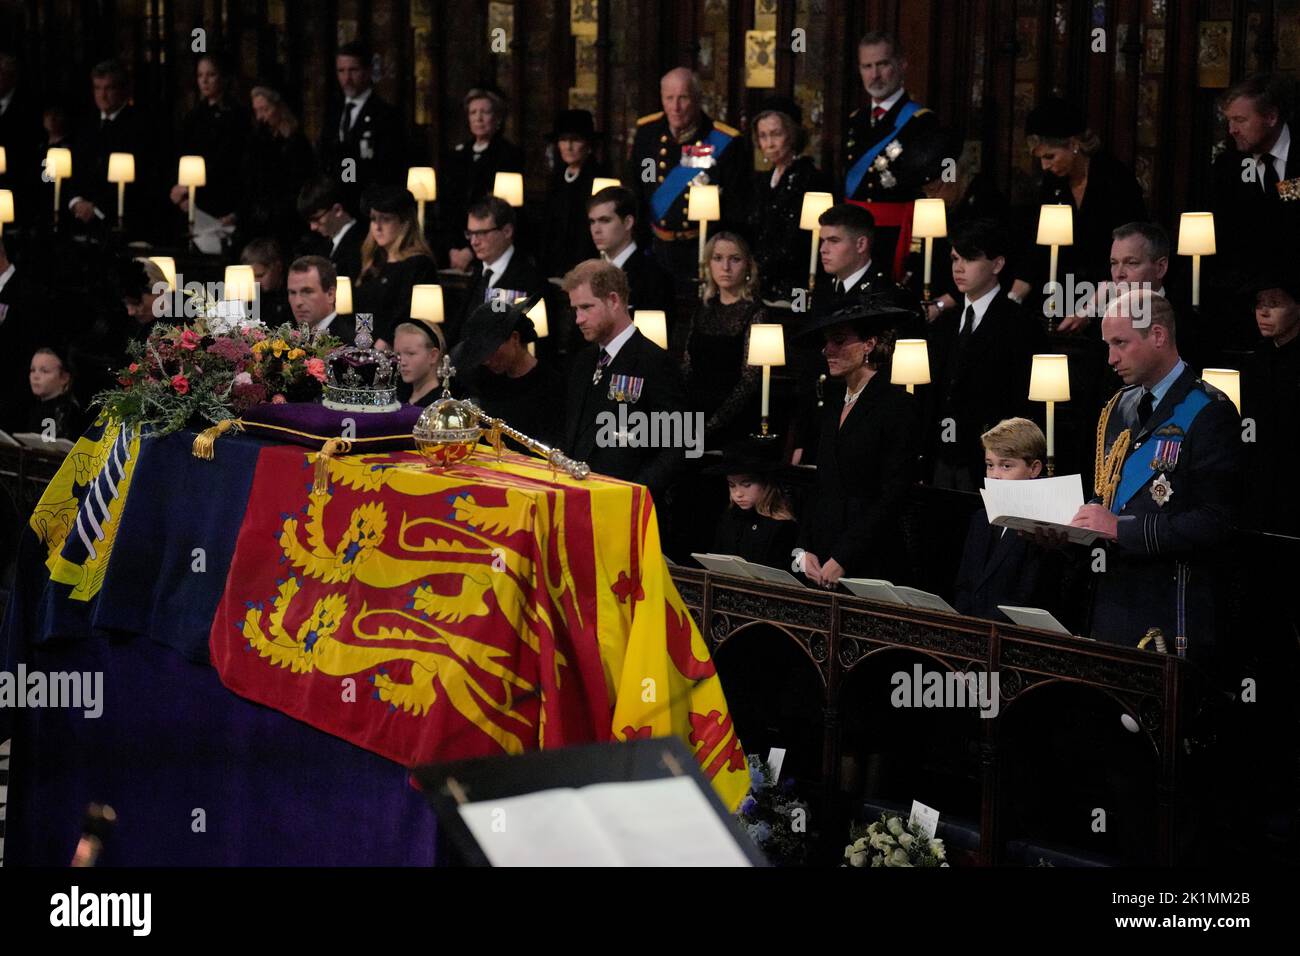 Members of the royal family (front row, left to right) Lena Tindall, Zara Tindall, Mia Tindall, the Duchess of Sussex, the Duke of Sussex, Princess Charlotte, the Princess of Wales, Prince George, and the Prince of Wales, stand for the coffin of Queen Elizabeth II, draped in the Royal Standard with the Imperial State Crown and the Sovereign's orb and sceptre, during the Committal Service at St George's Chapel in Windsor Castle, Berkshire. Picture date: Monday September 19, 2022. Stock Photo